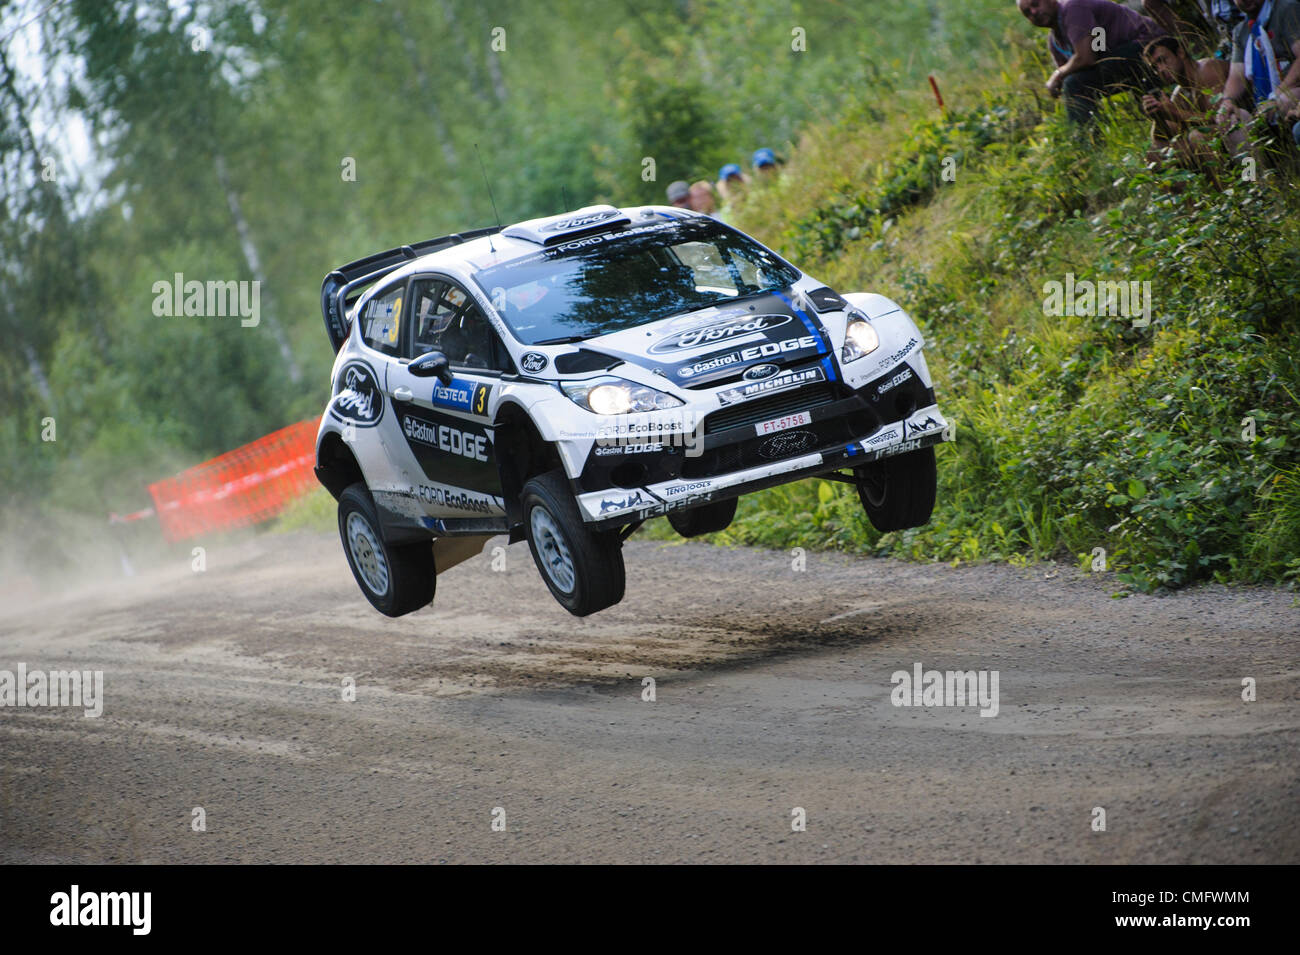 JYVÄSKYLÄ, FINLAND - August 4: Jari-Matti Latvala of Finland and Miikka Anttila of Finland compete in their Ford World Rally Team Ford Fiesta RS WRC during Day 3 of the WRC Rally Finland on August 4, 2012 in Jyväskylä , Finland Stock Photo